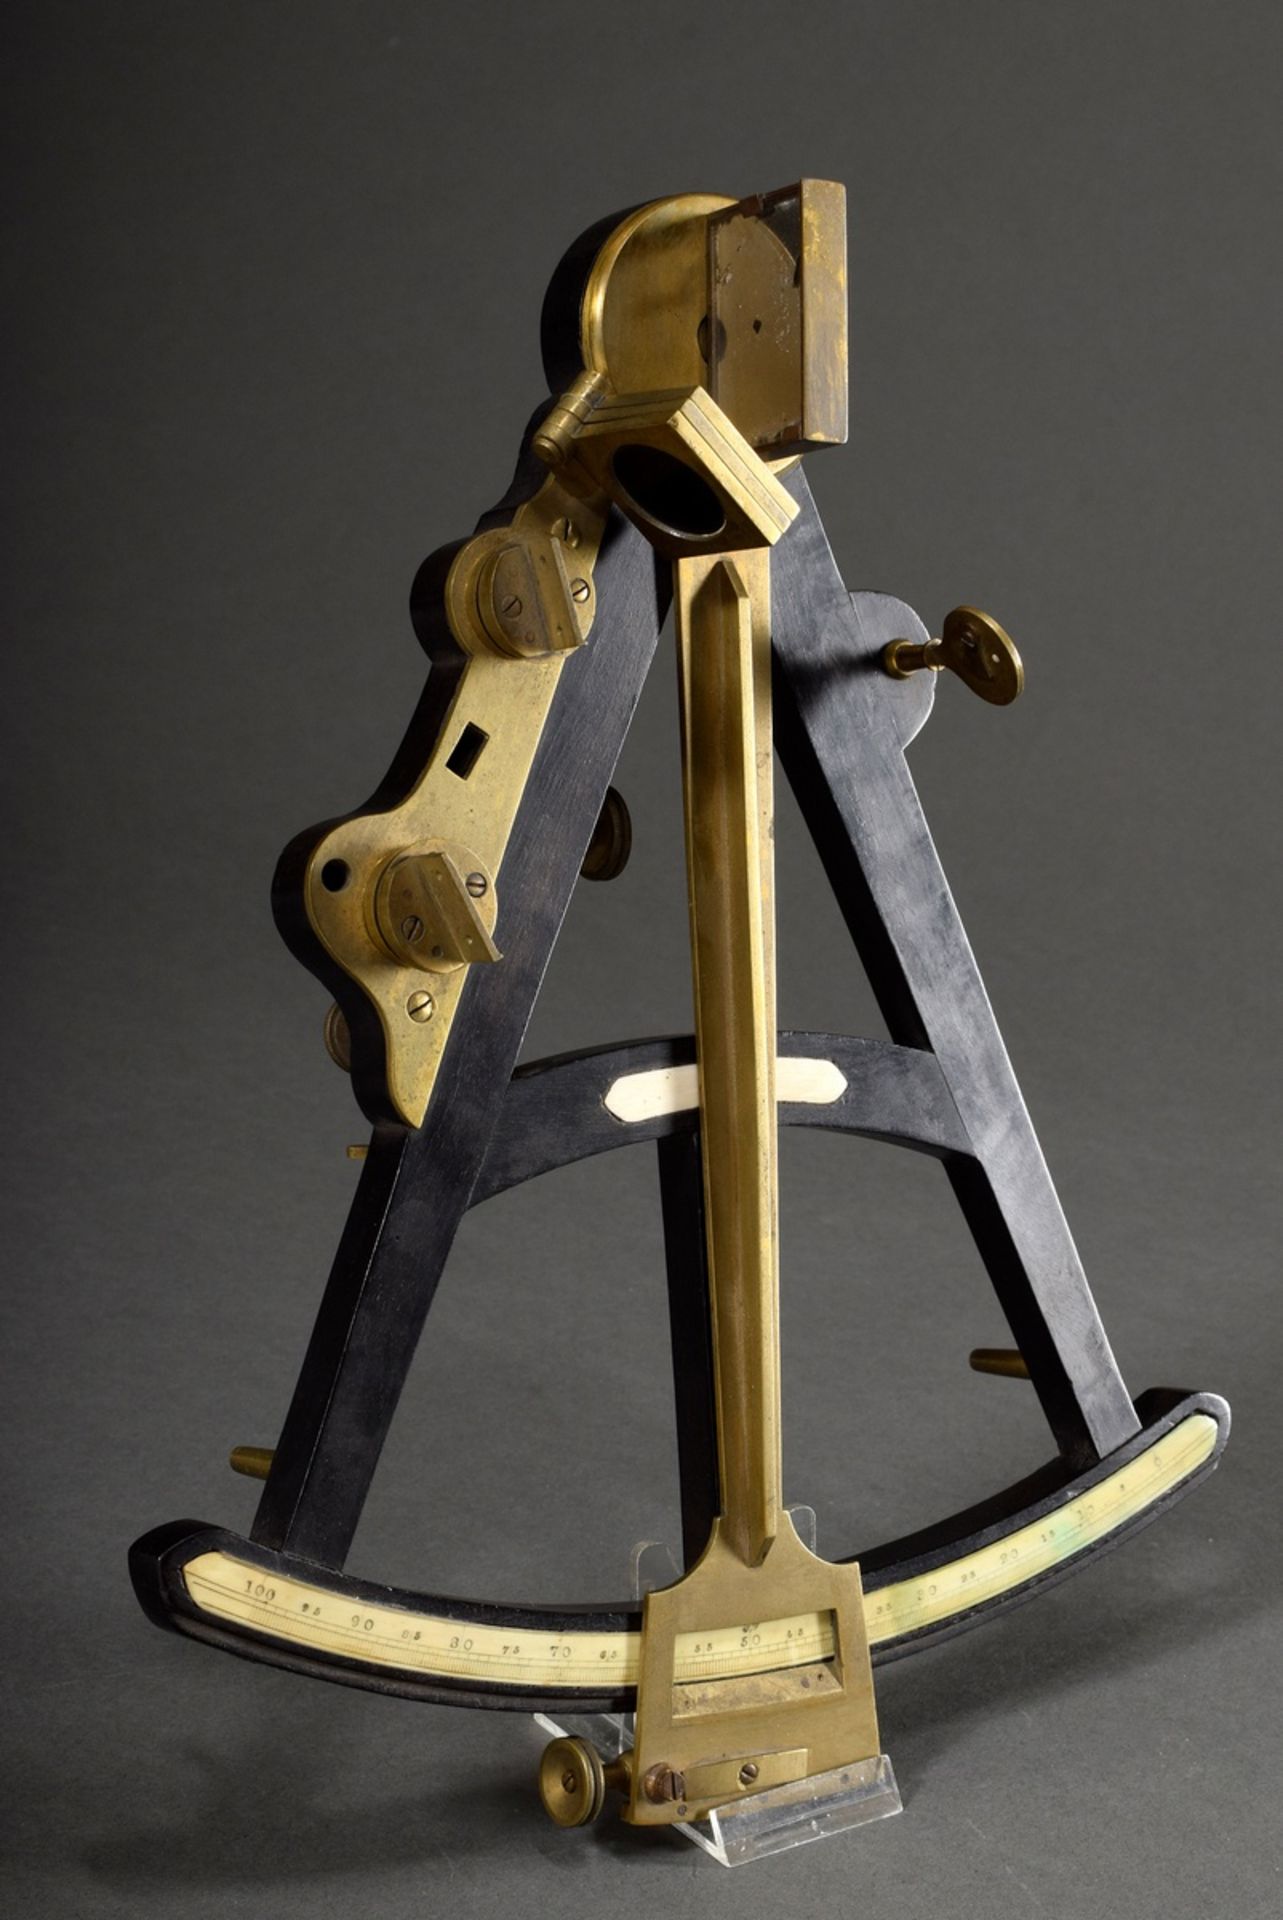 Ebony sextant with brass eyepieces and instruments, bone inlays, 19th century, h. 30cm, traces of a